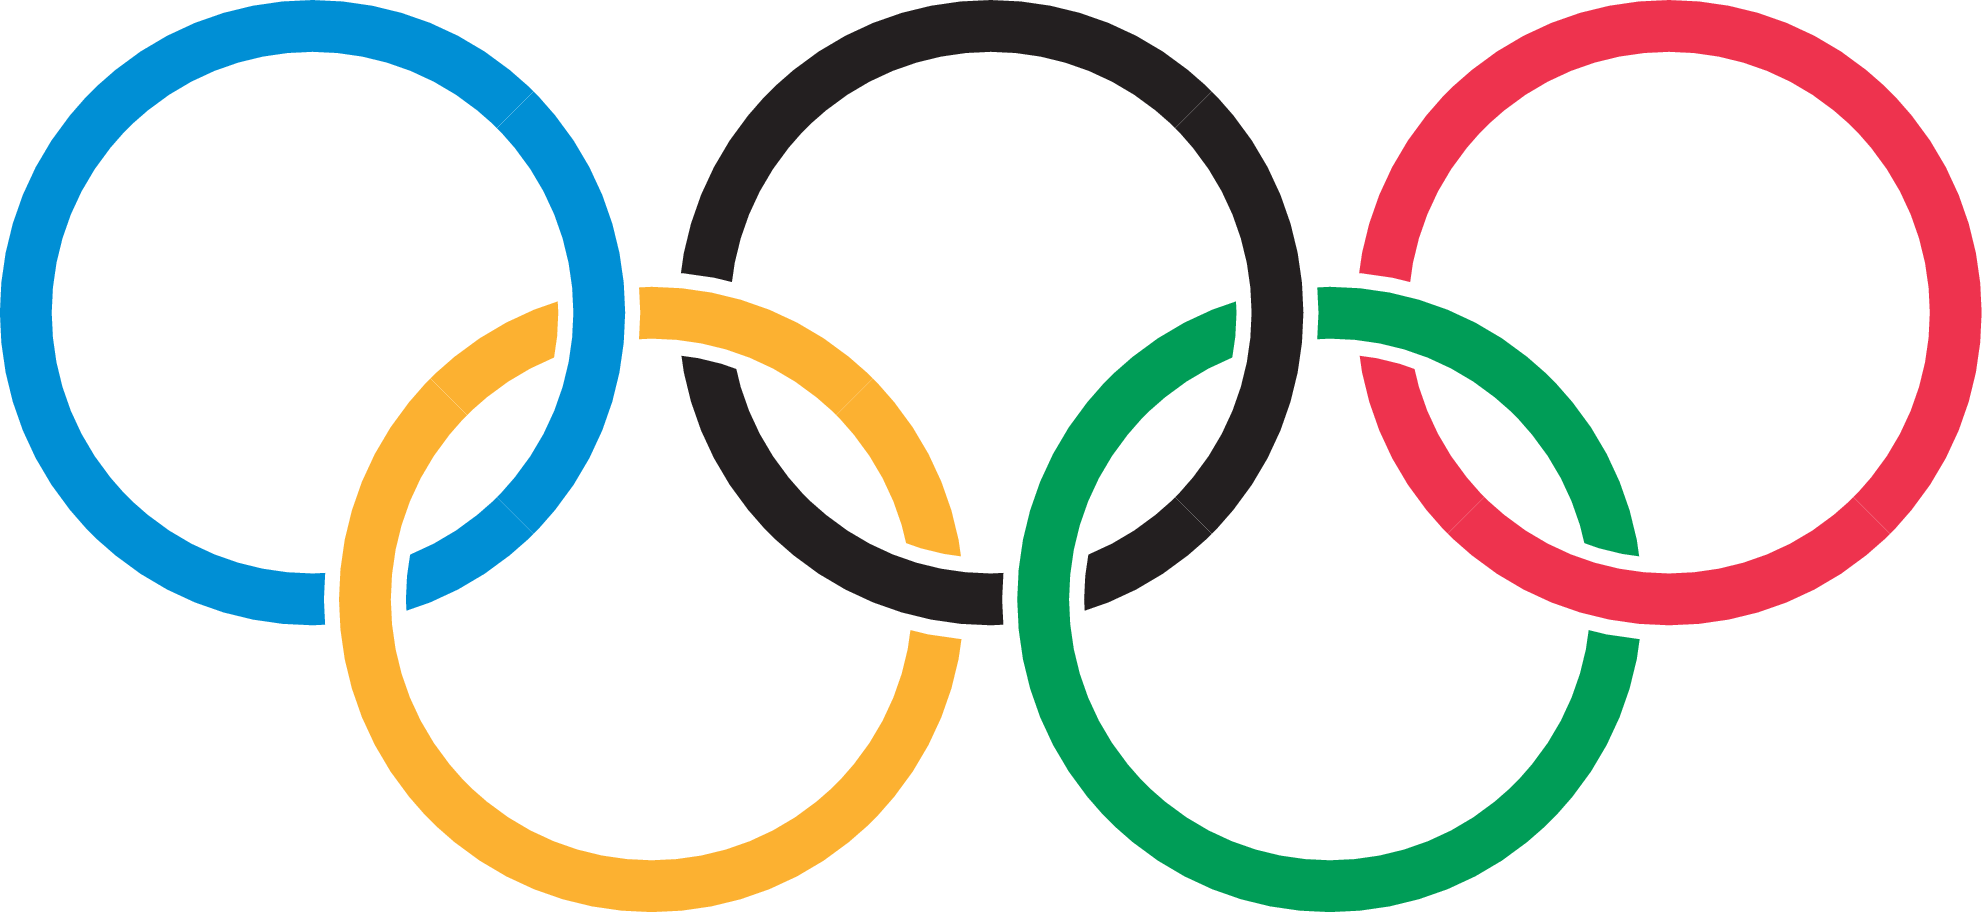 Olympic Circle Logo - popularity contest - Olympic Games Logo - Free Style Edition ...